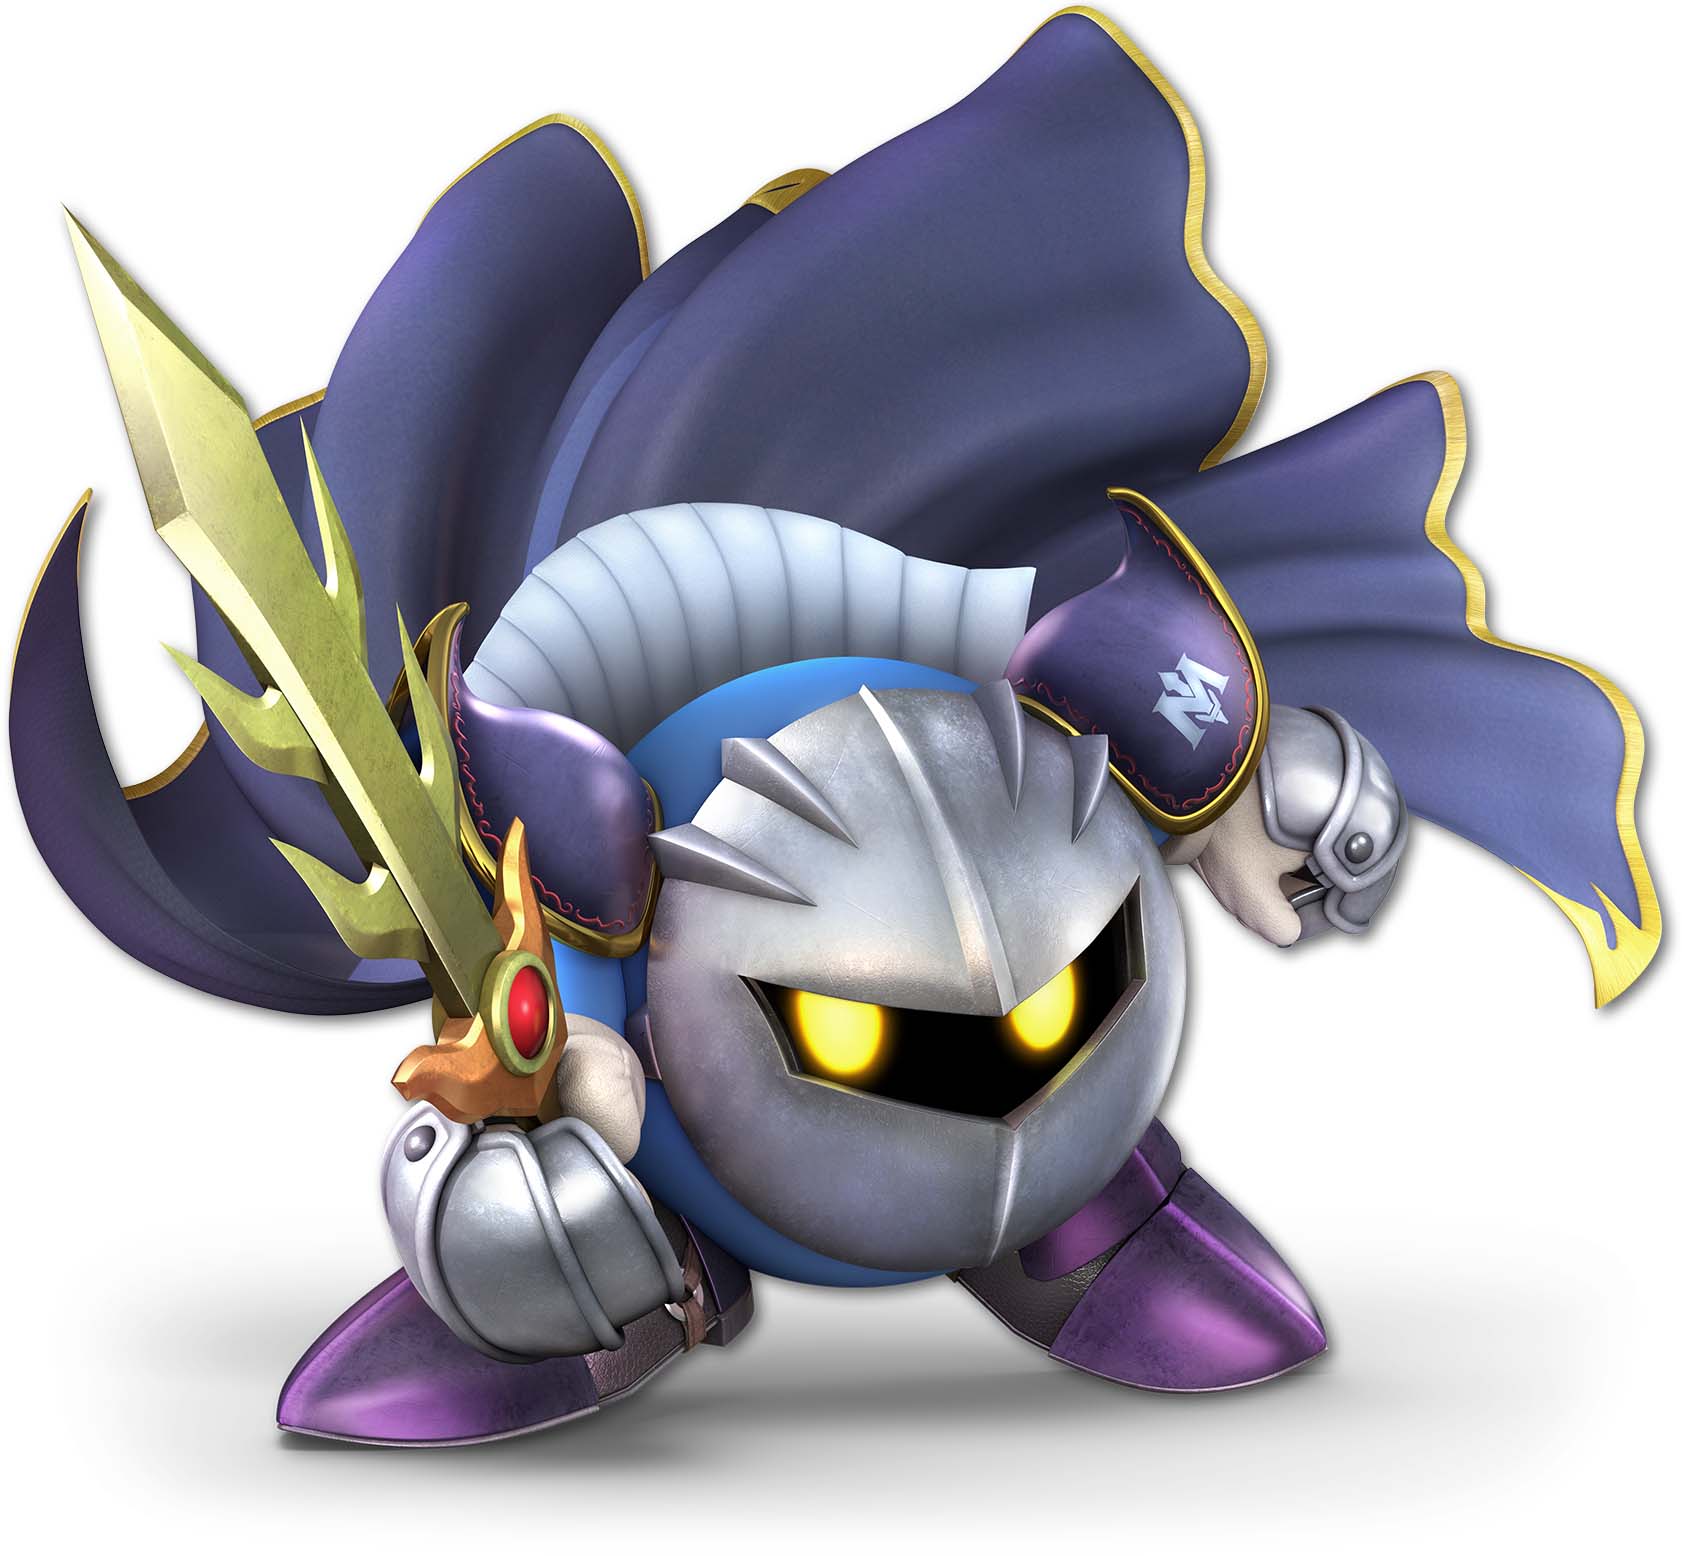 How to counter Meta Knight with Ice Climbers in Super Smash Bros. Ultimate